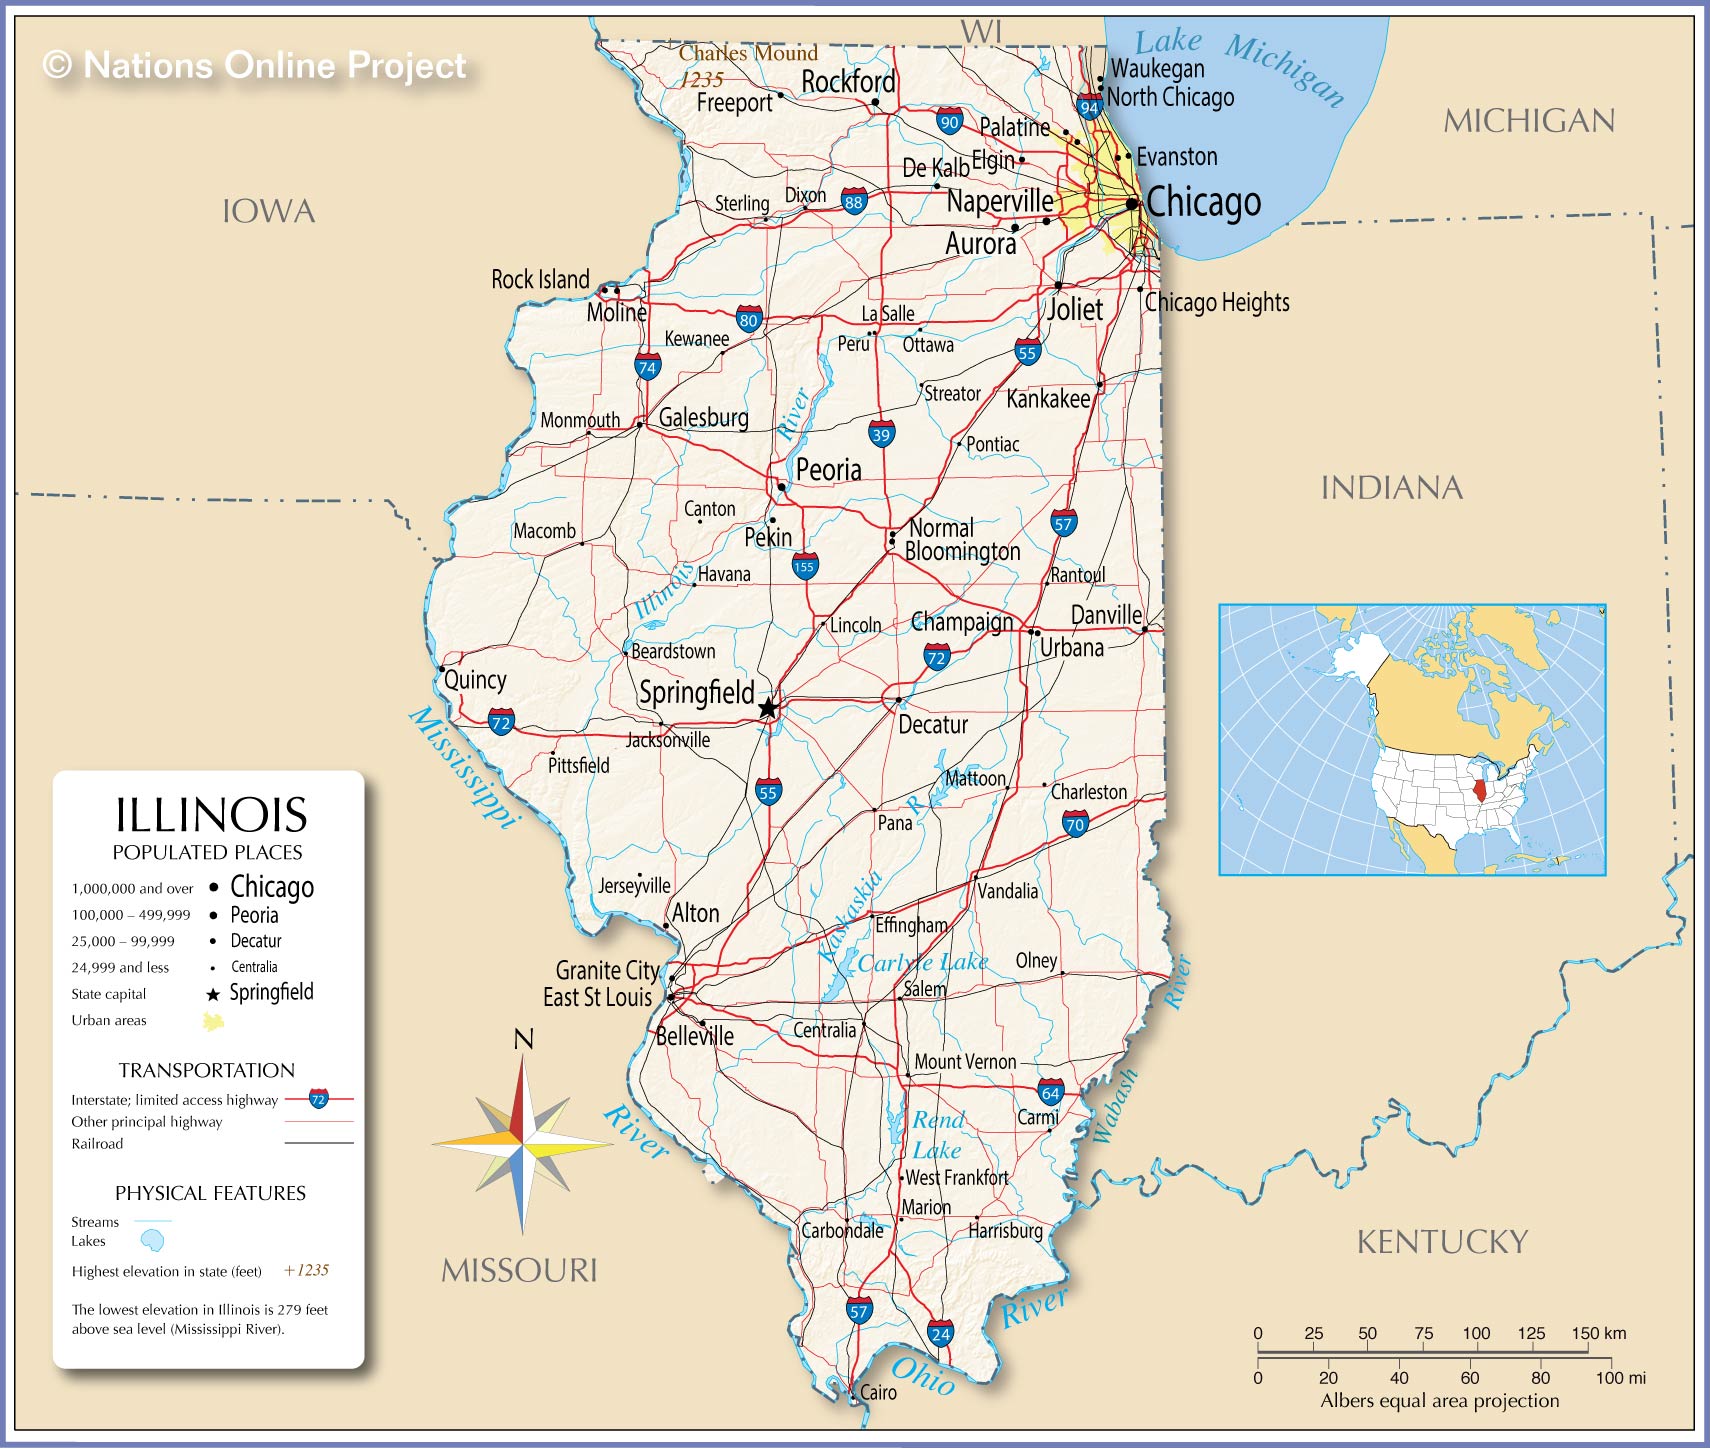 Map of the State of Illinois, USA - Nations Online Project